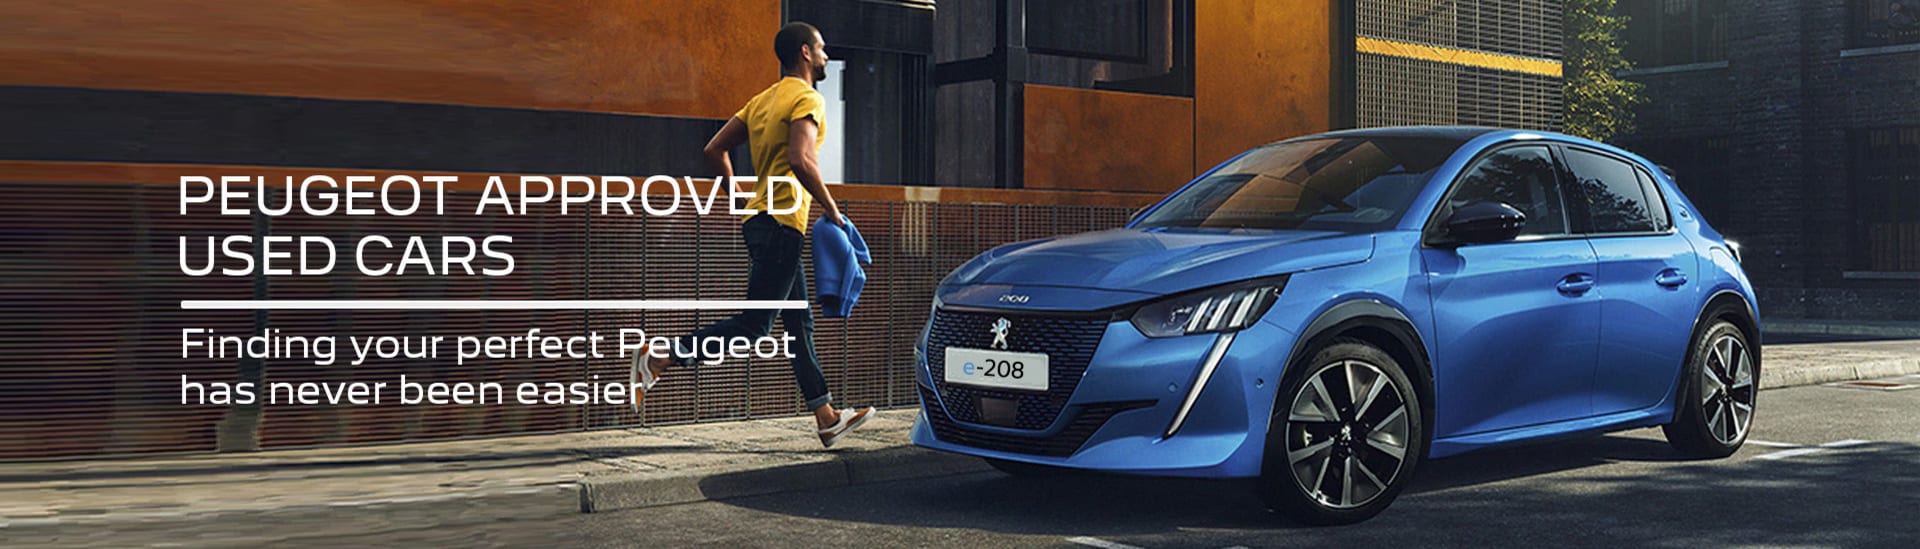 Peugeot Approved Used Cars